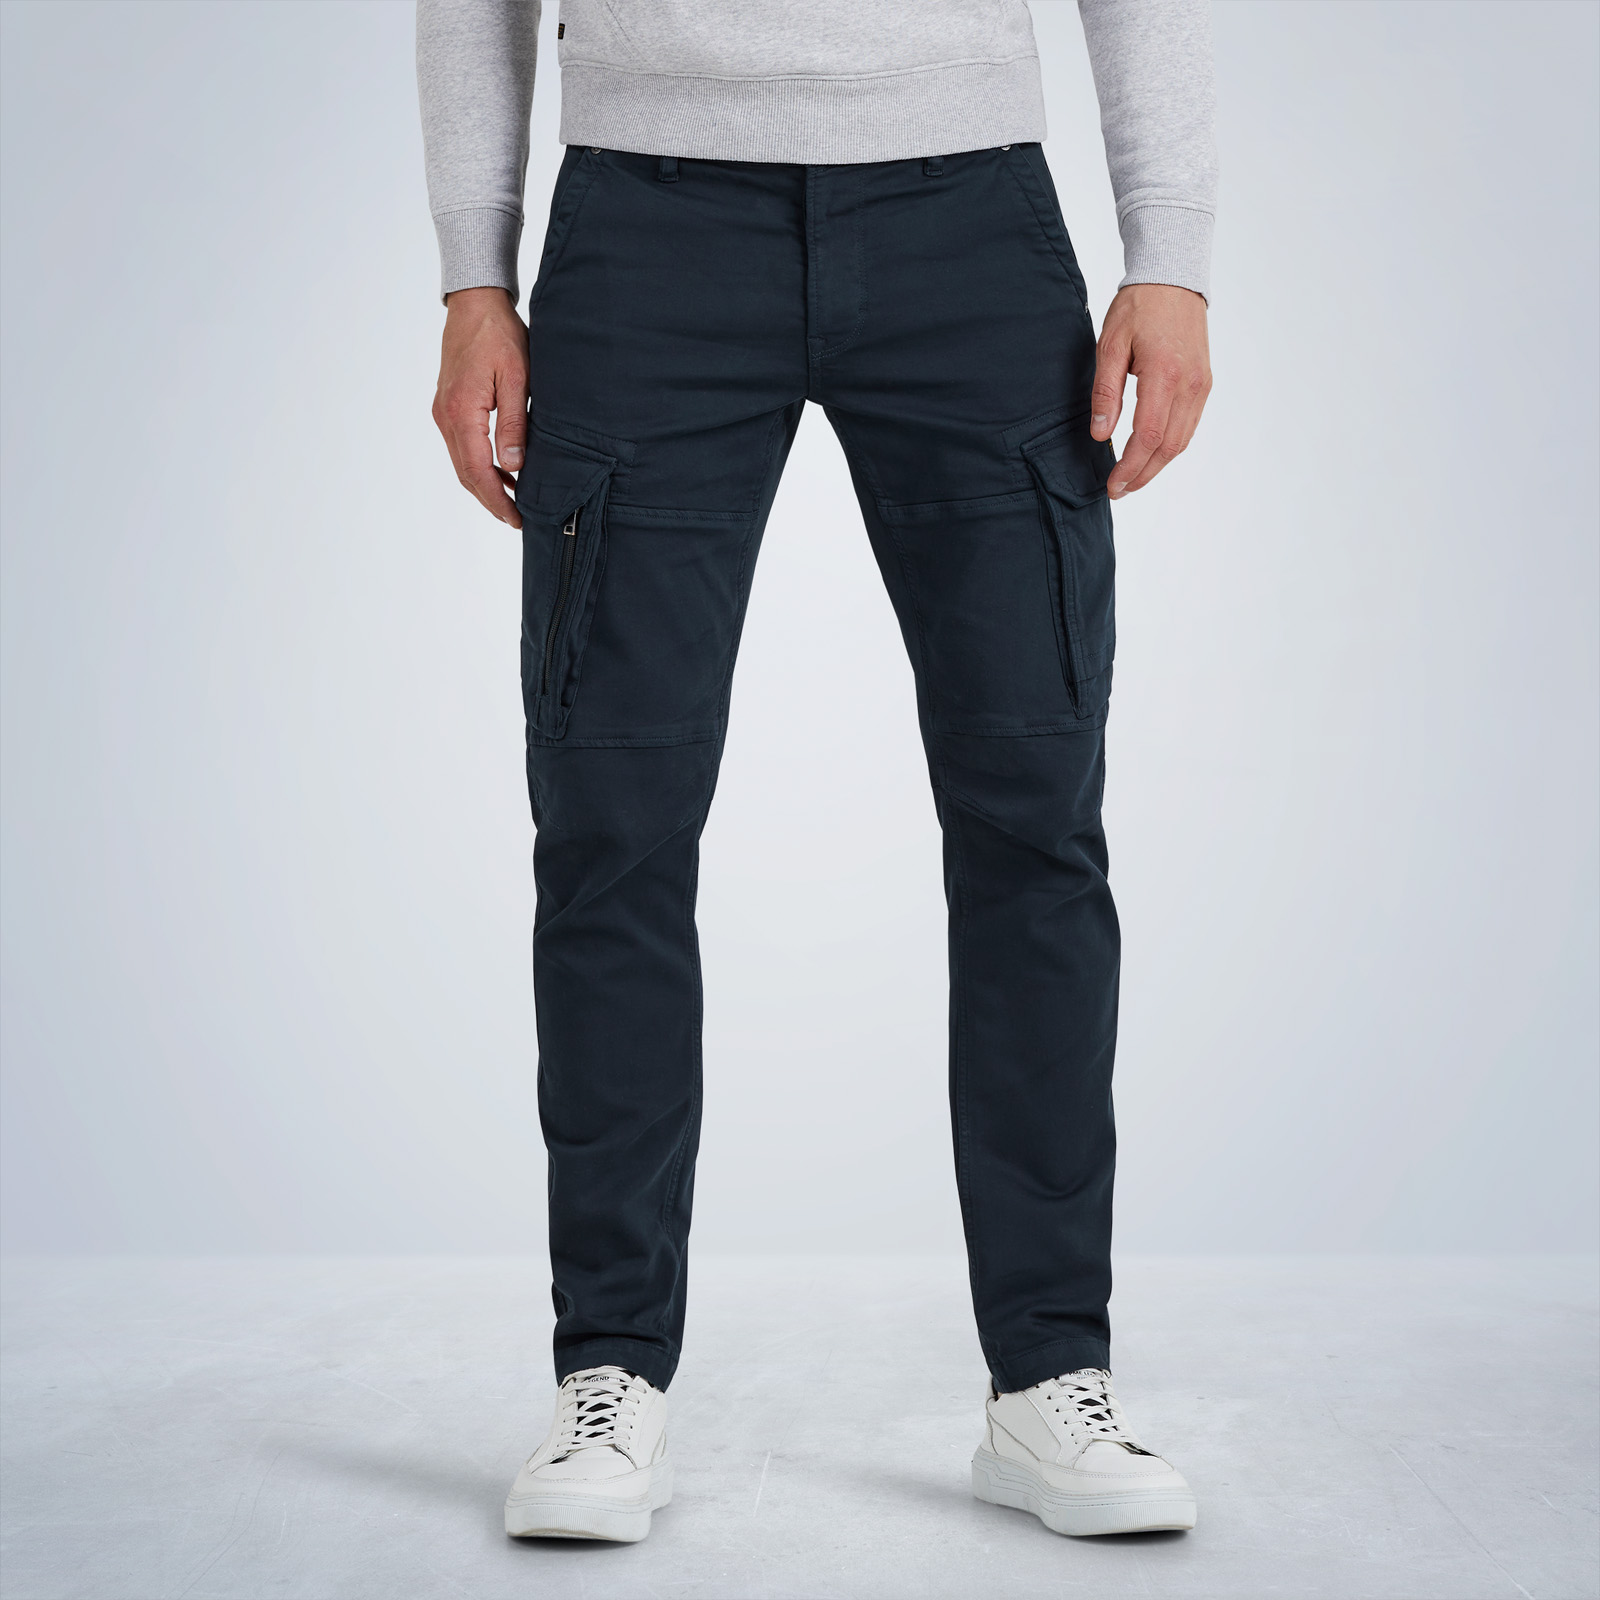 PME LEGEND | Expedizor relaxed fit cargo pants | Free shipping and returns